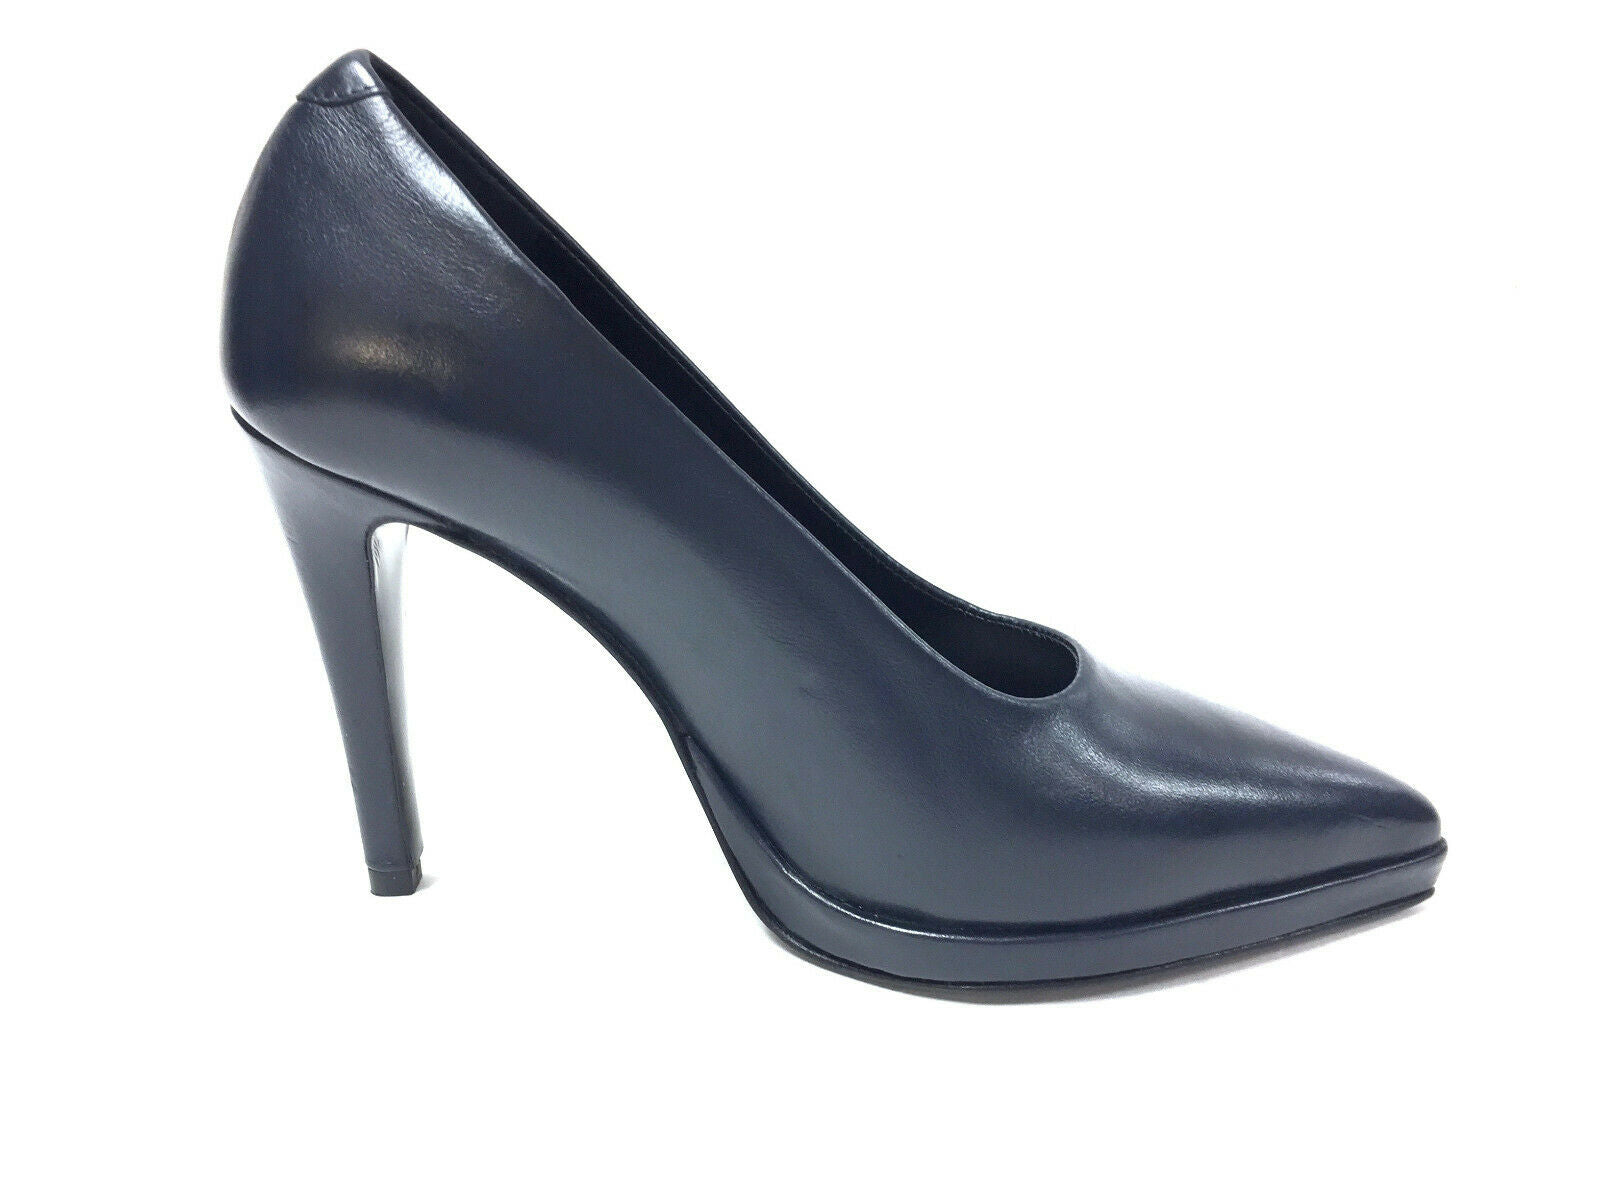 navy pointed toe pumps